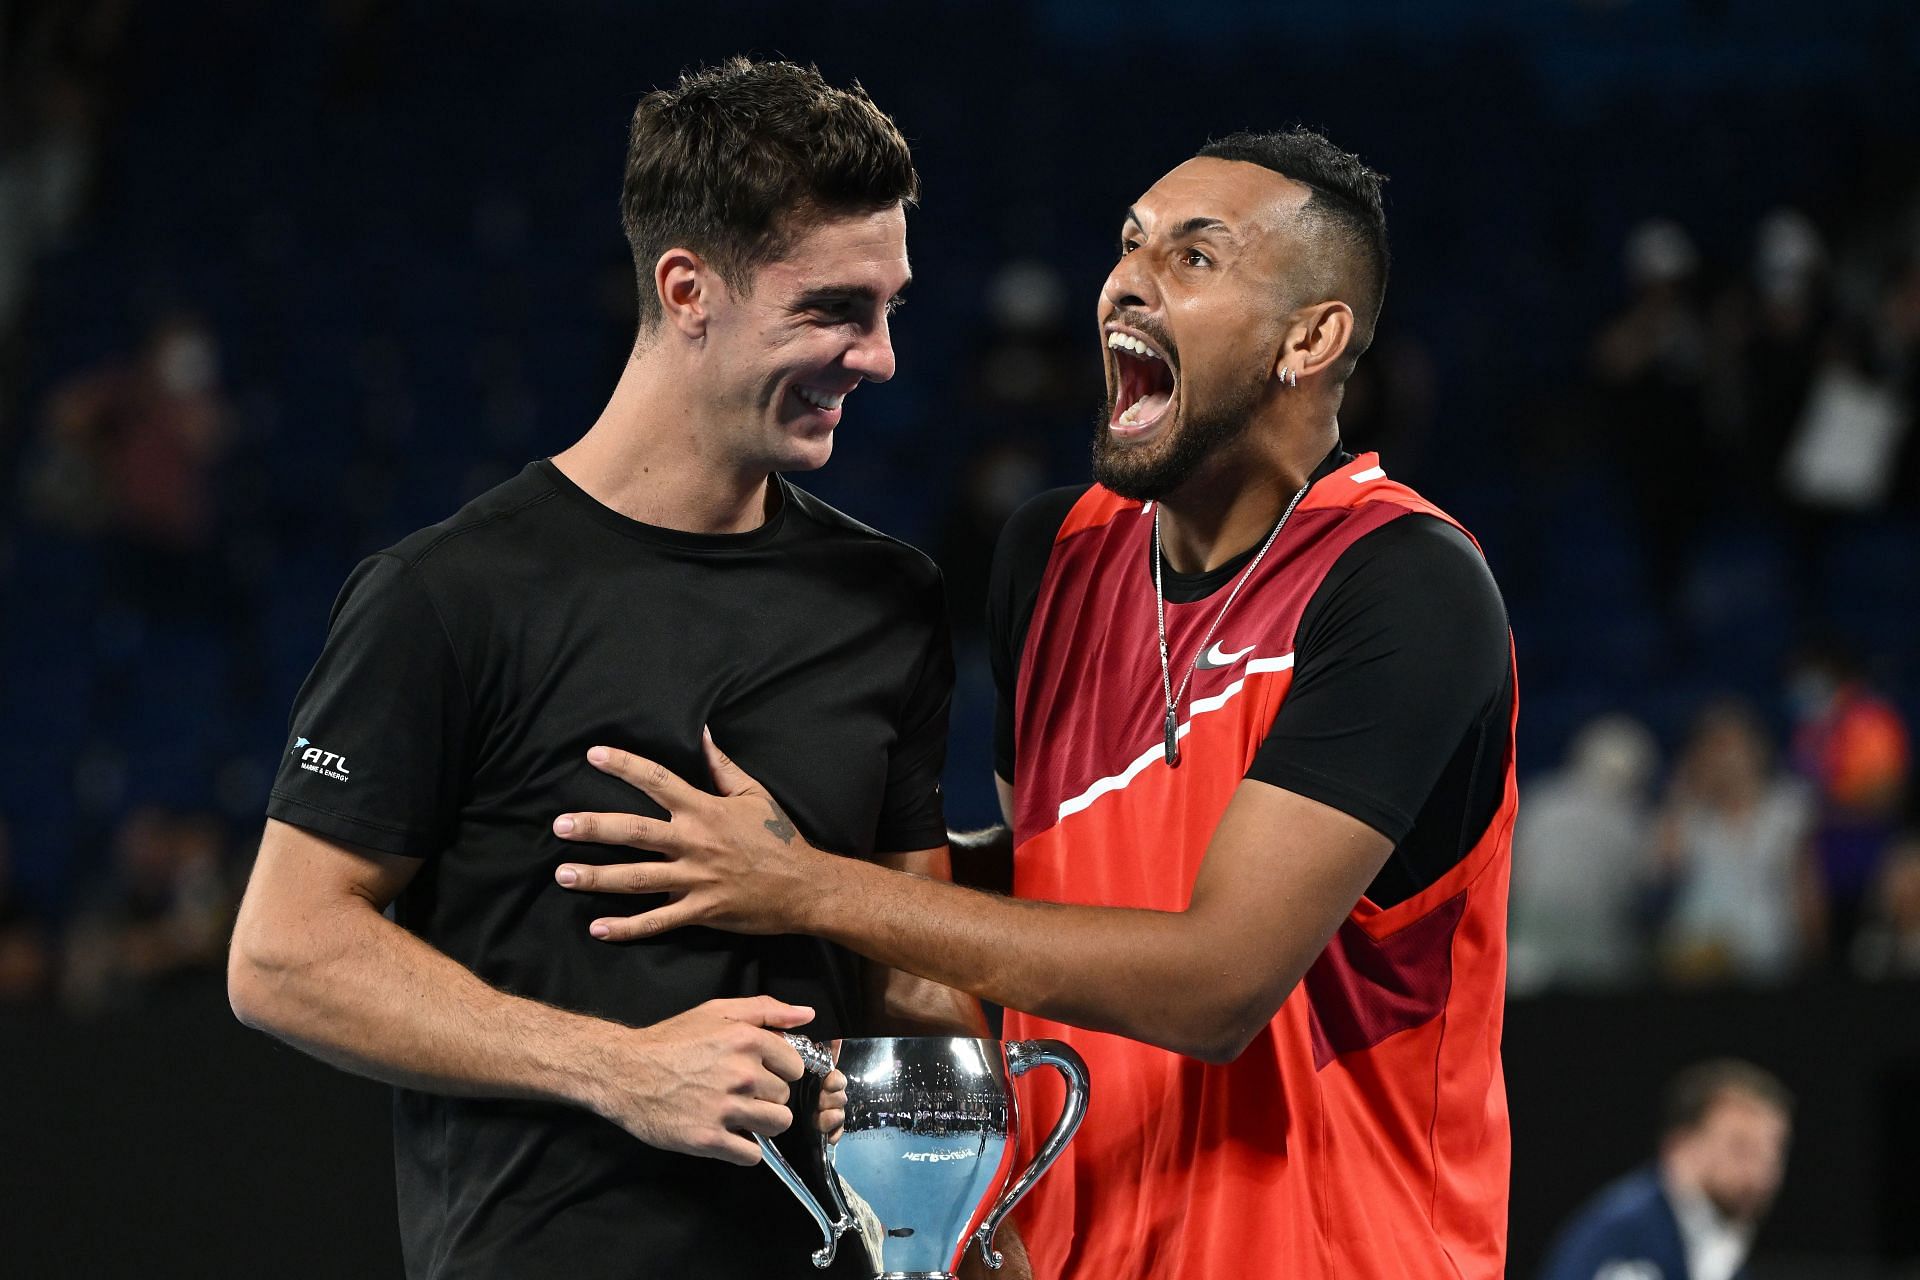 Nick Kyrgios and Thanasi Kokkinakis still remain alive in the doubles category in Miami